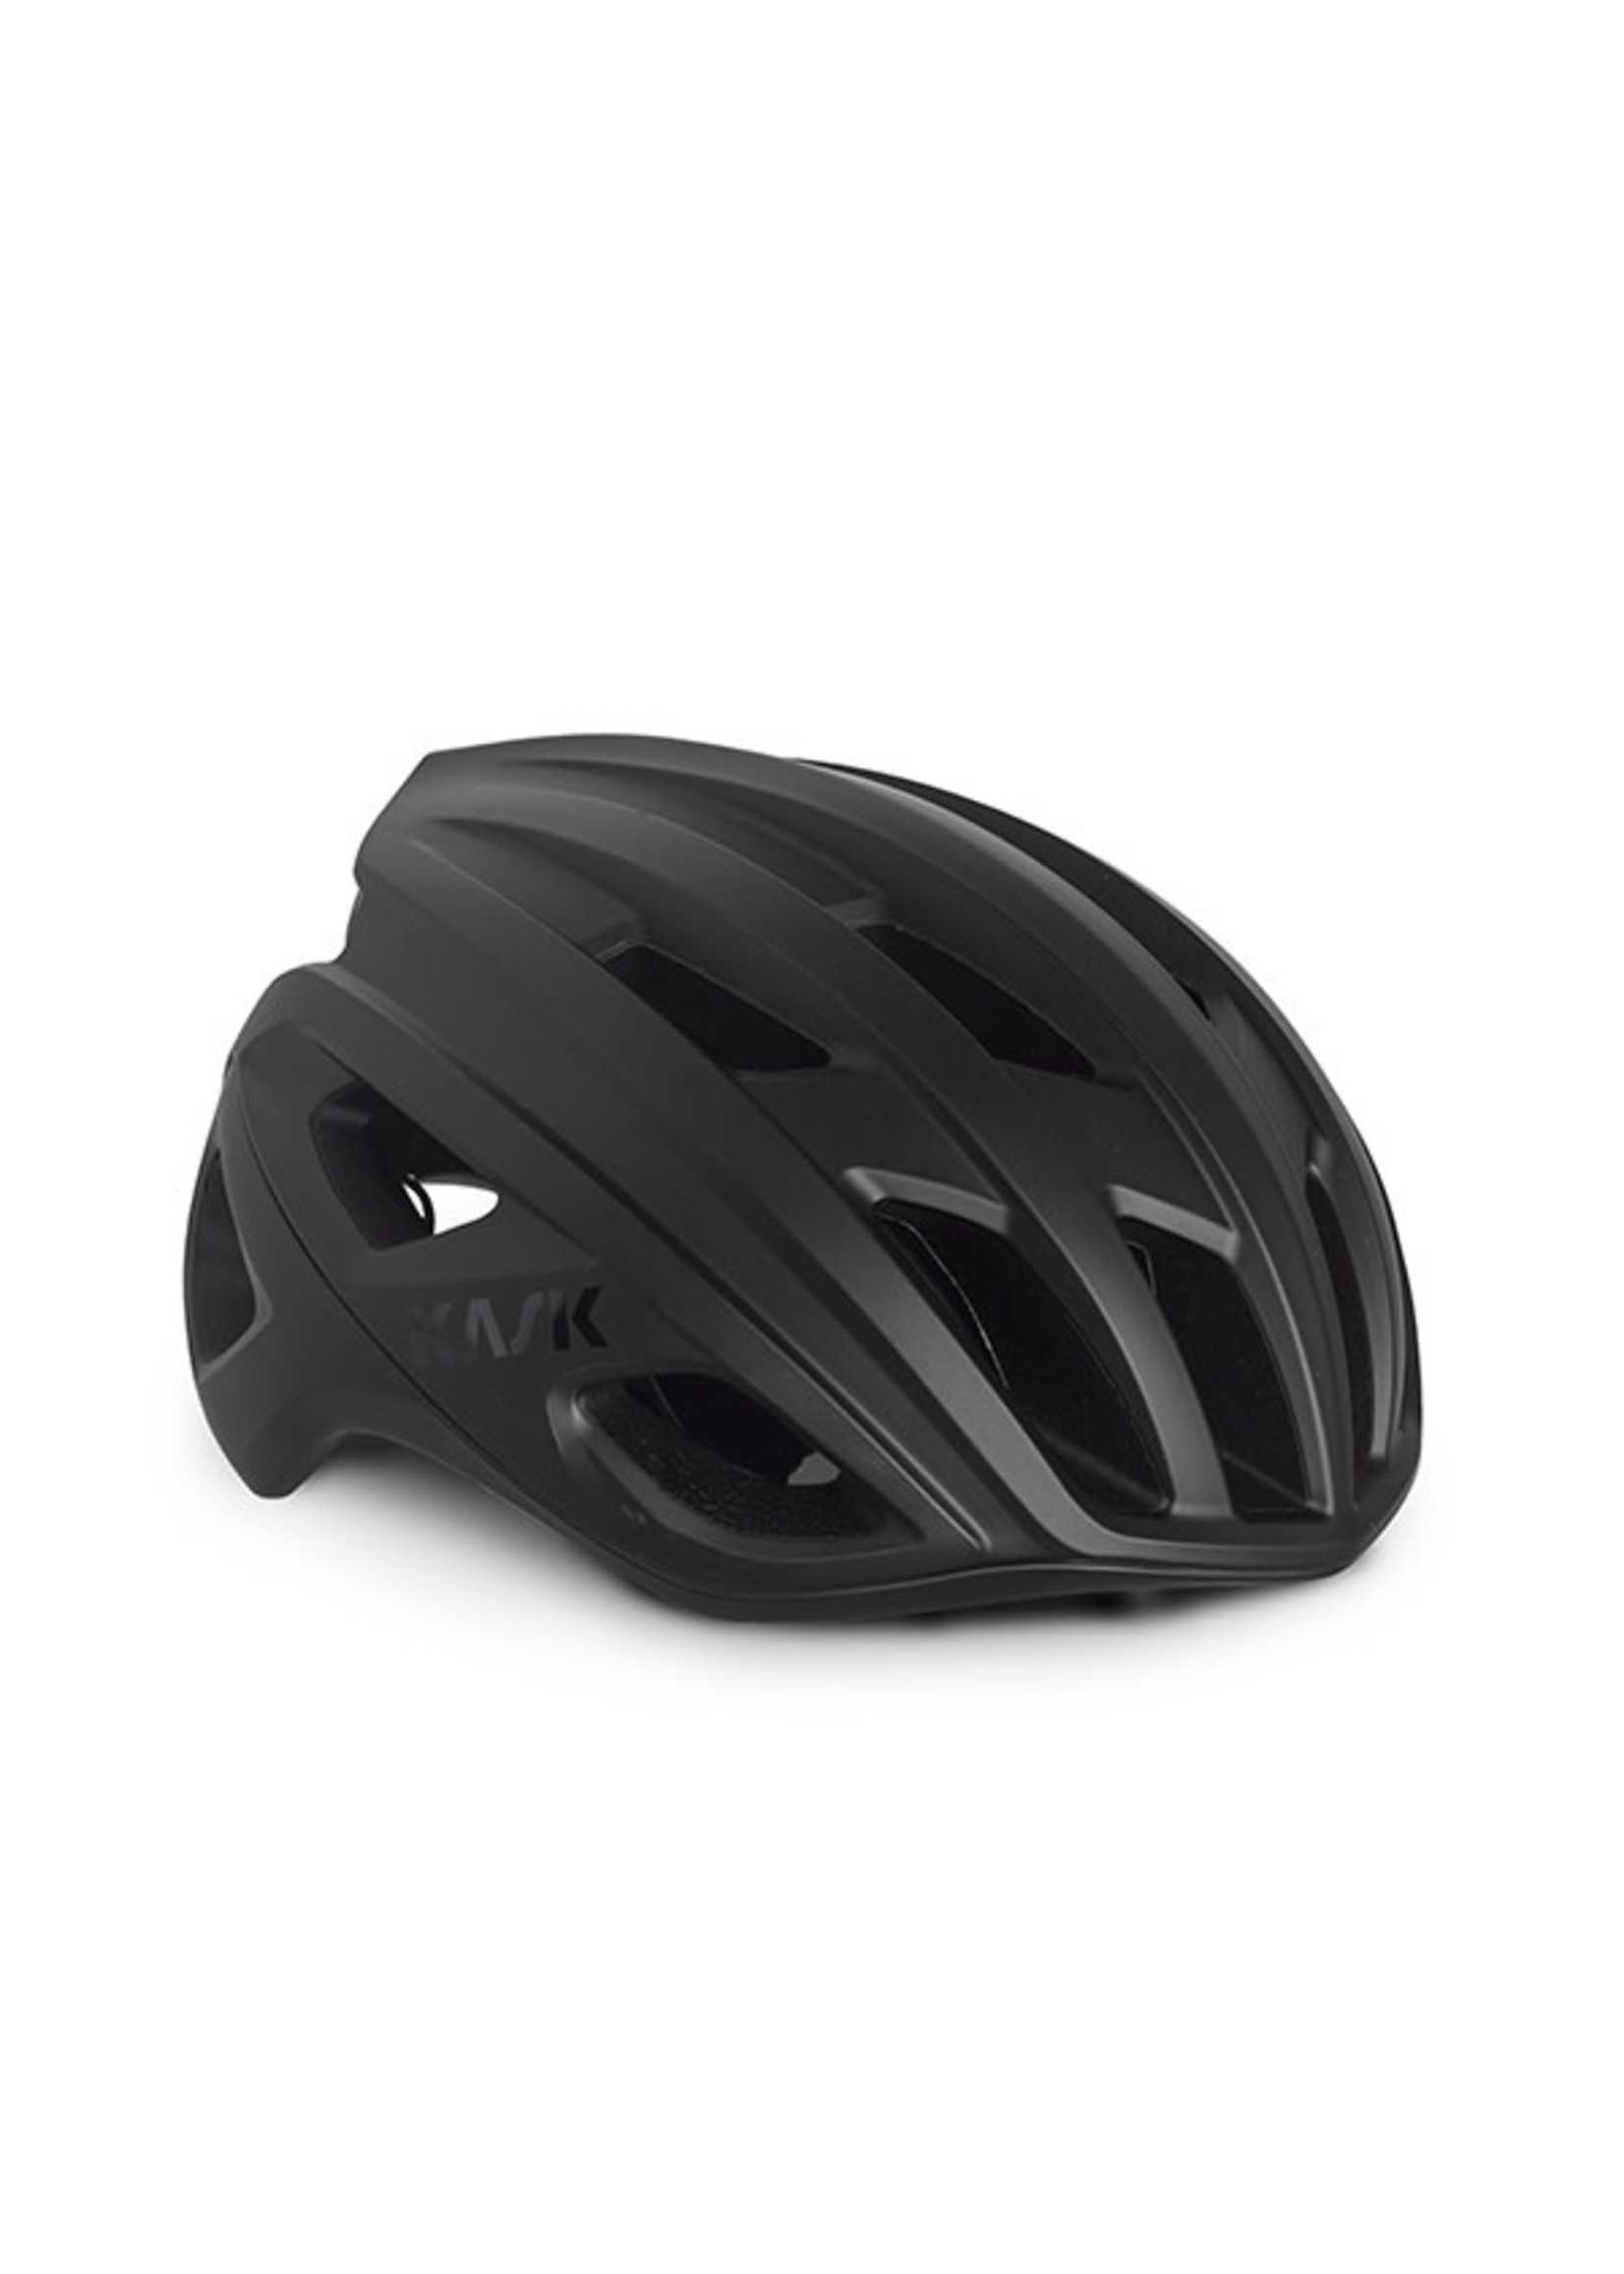 Kask Mojito Cubed